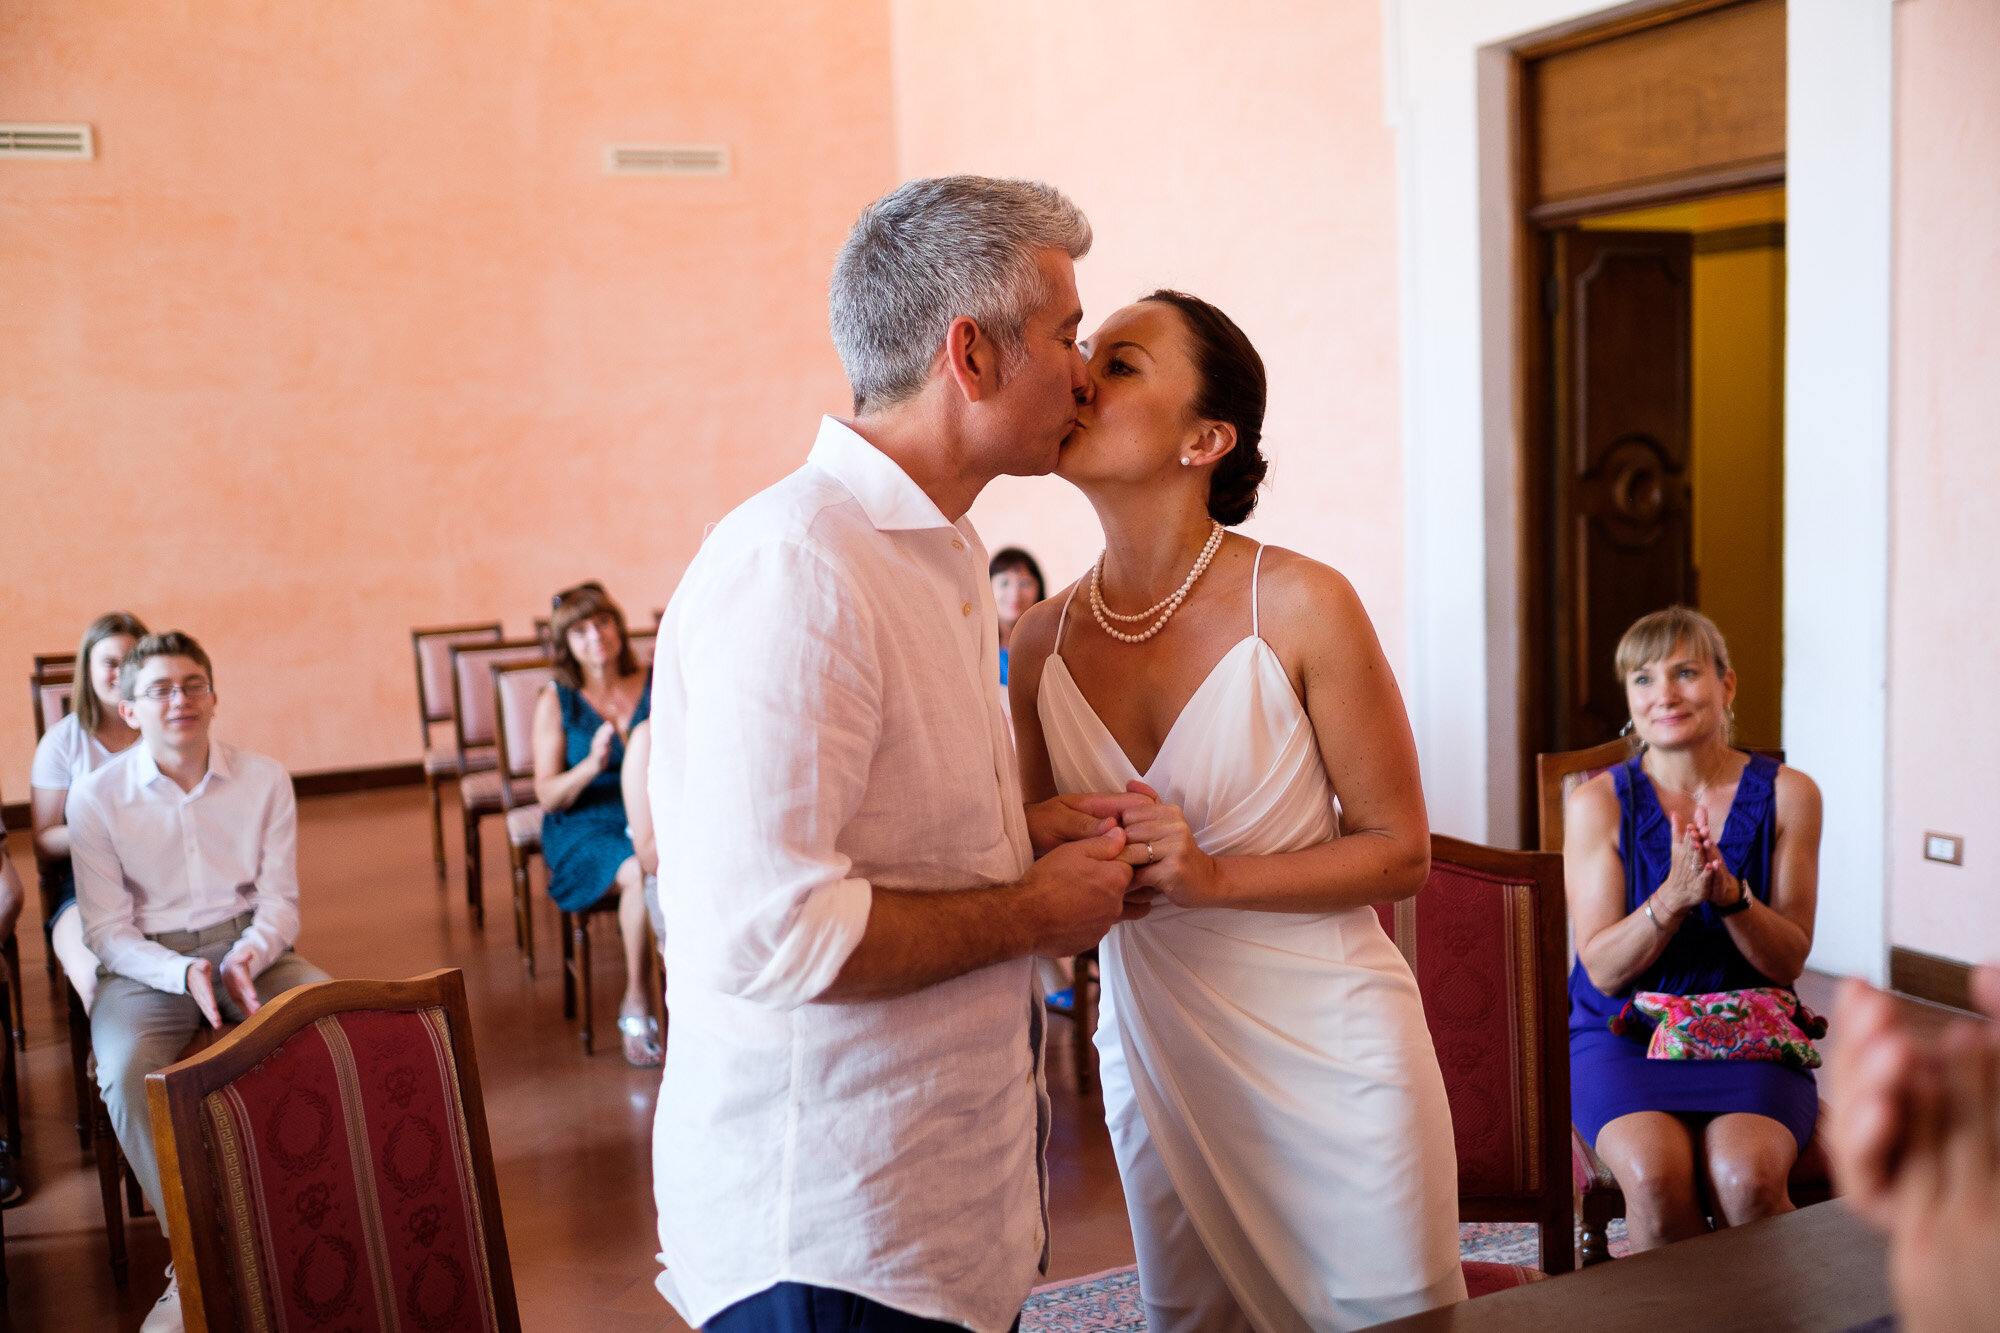  Elena + Steve share vows during their civil wedding ceremony at the local city hall during their destination wedding in Tuscany, Italy by wedding photographer Scott Williams (www.scottwilliamsphotographer.com) 